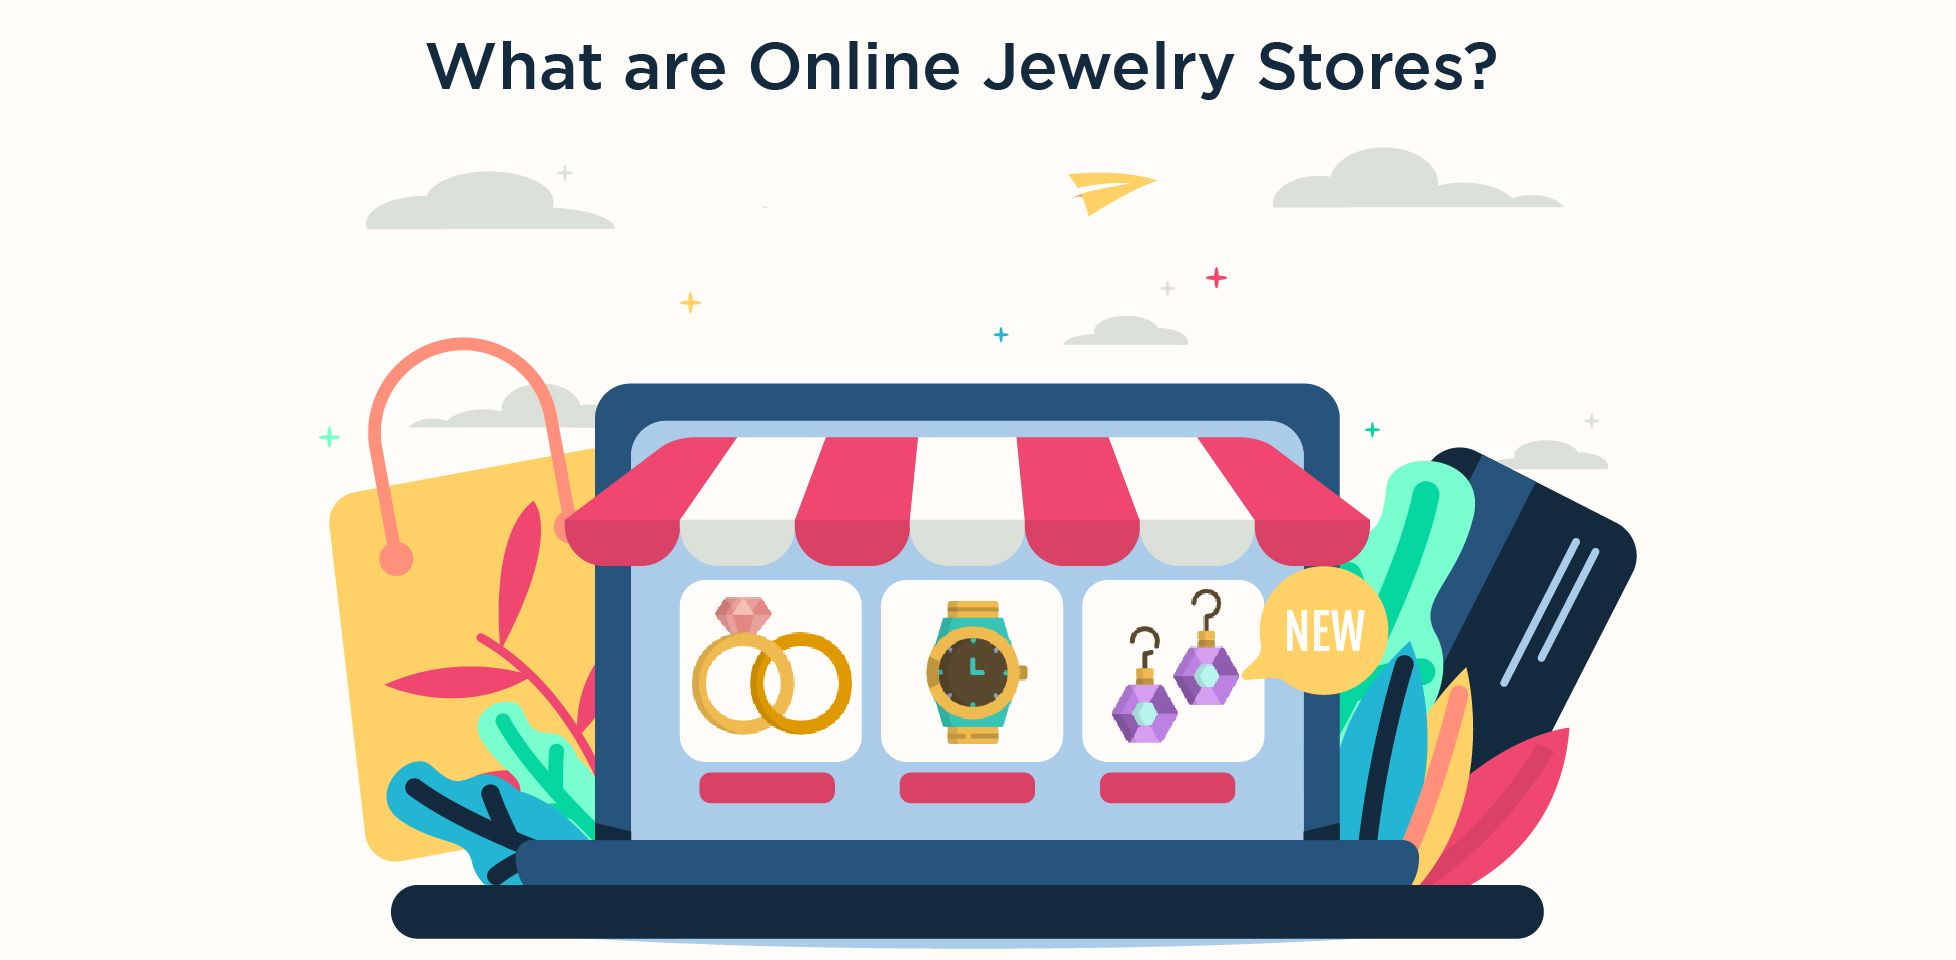 What are Online Jewelry Stores?